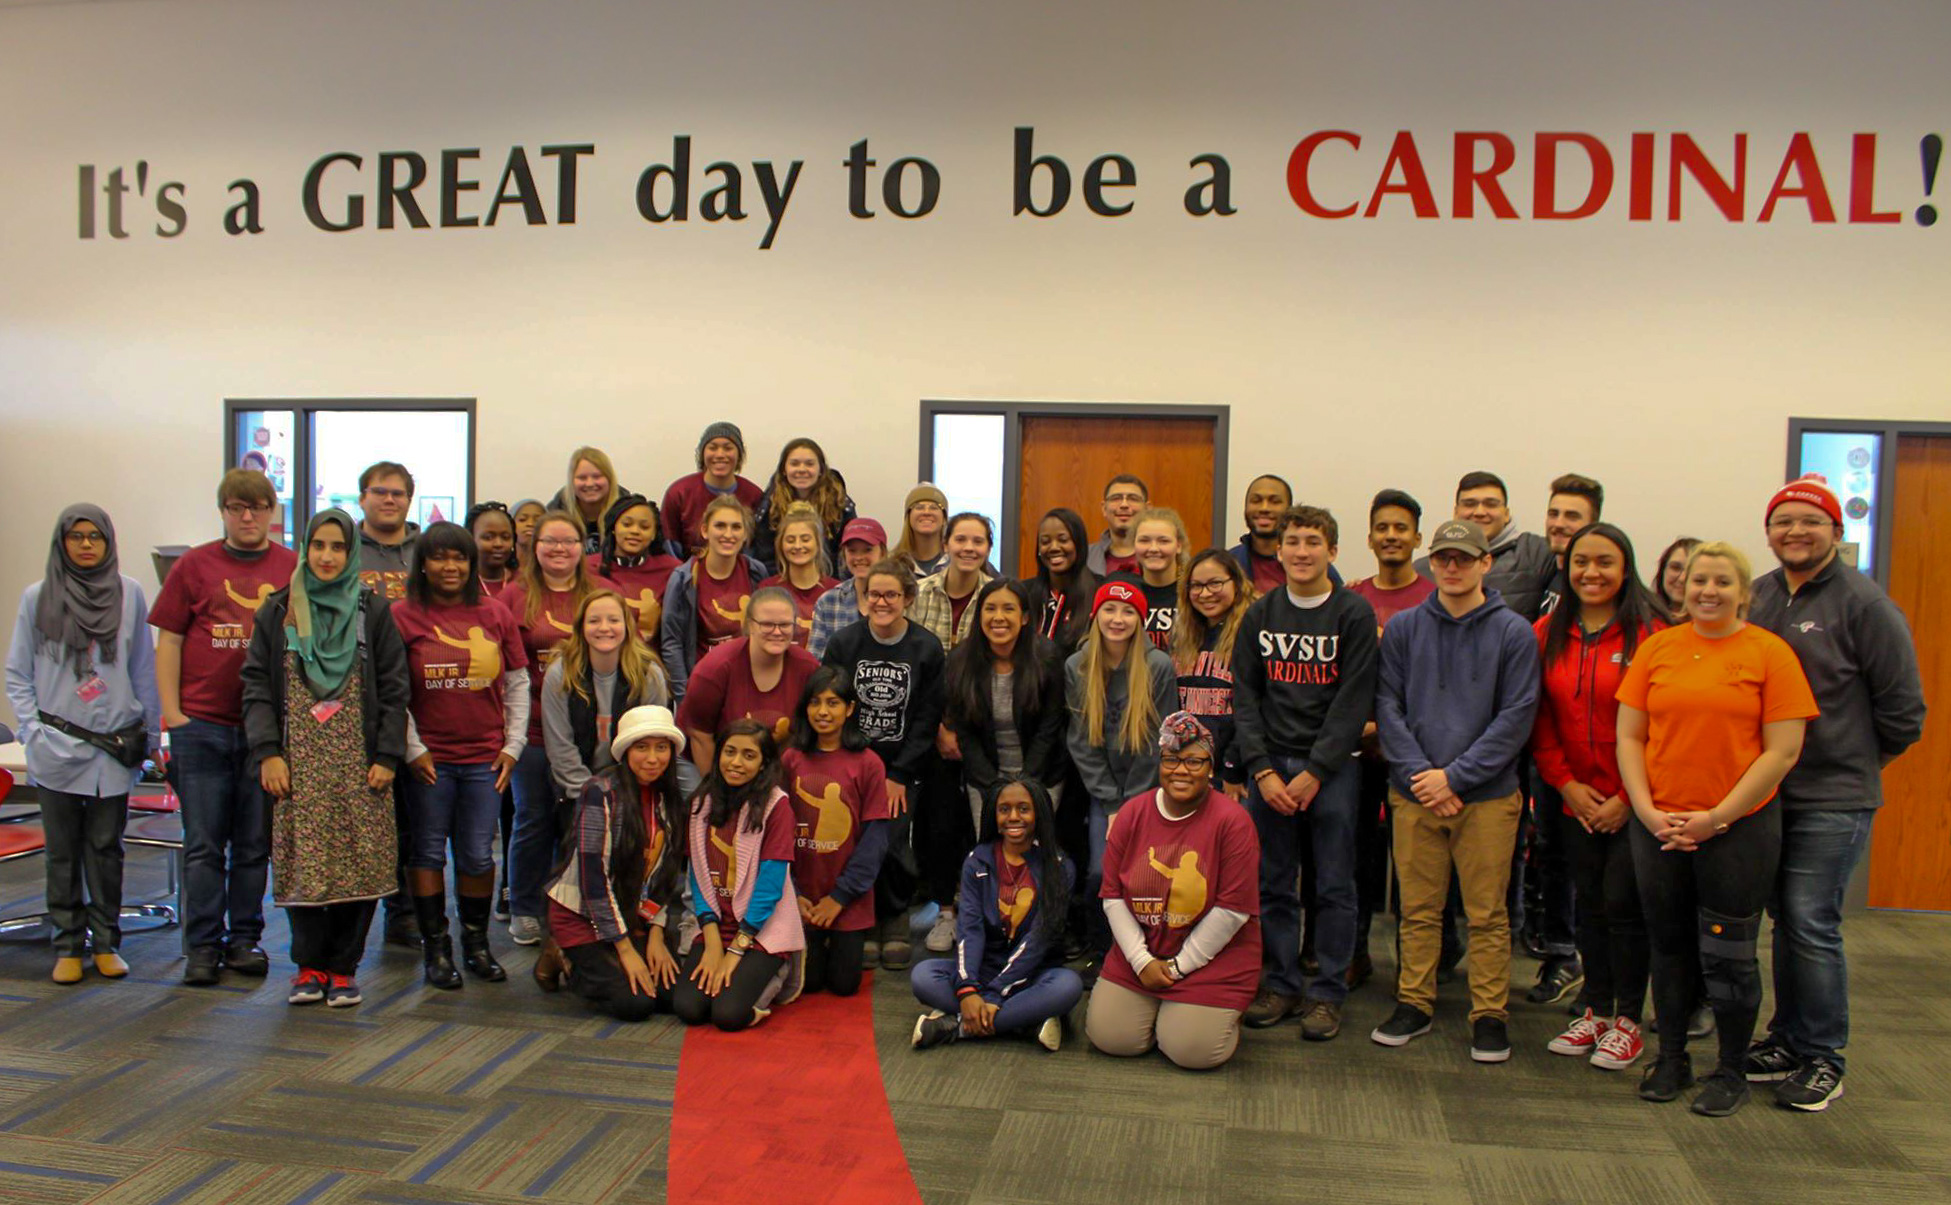 SVSU Students and staff pose with State Representative Vanessa Guerra, who was the keynote speaker for the day of service